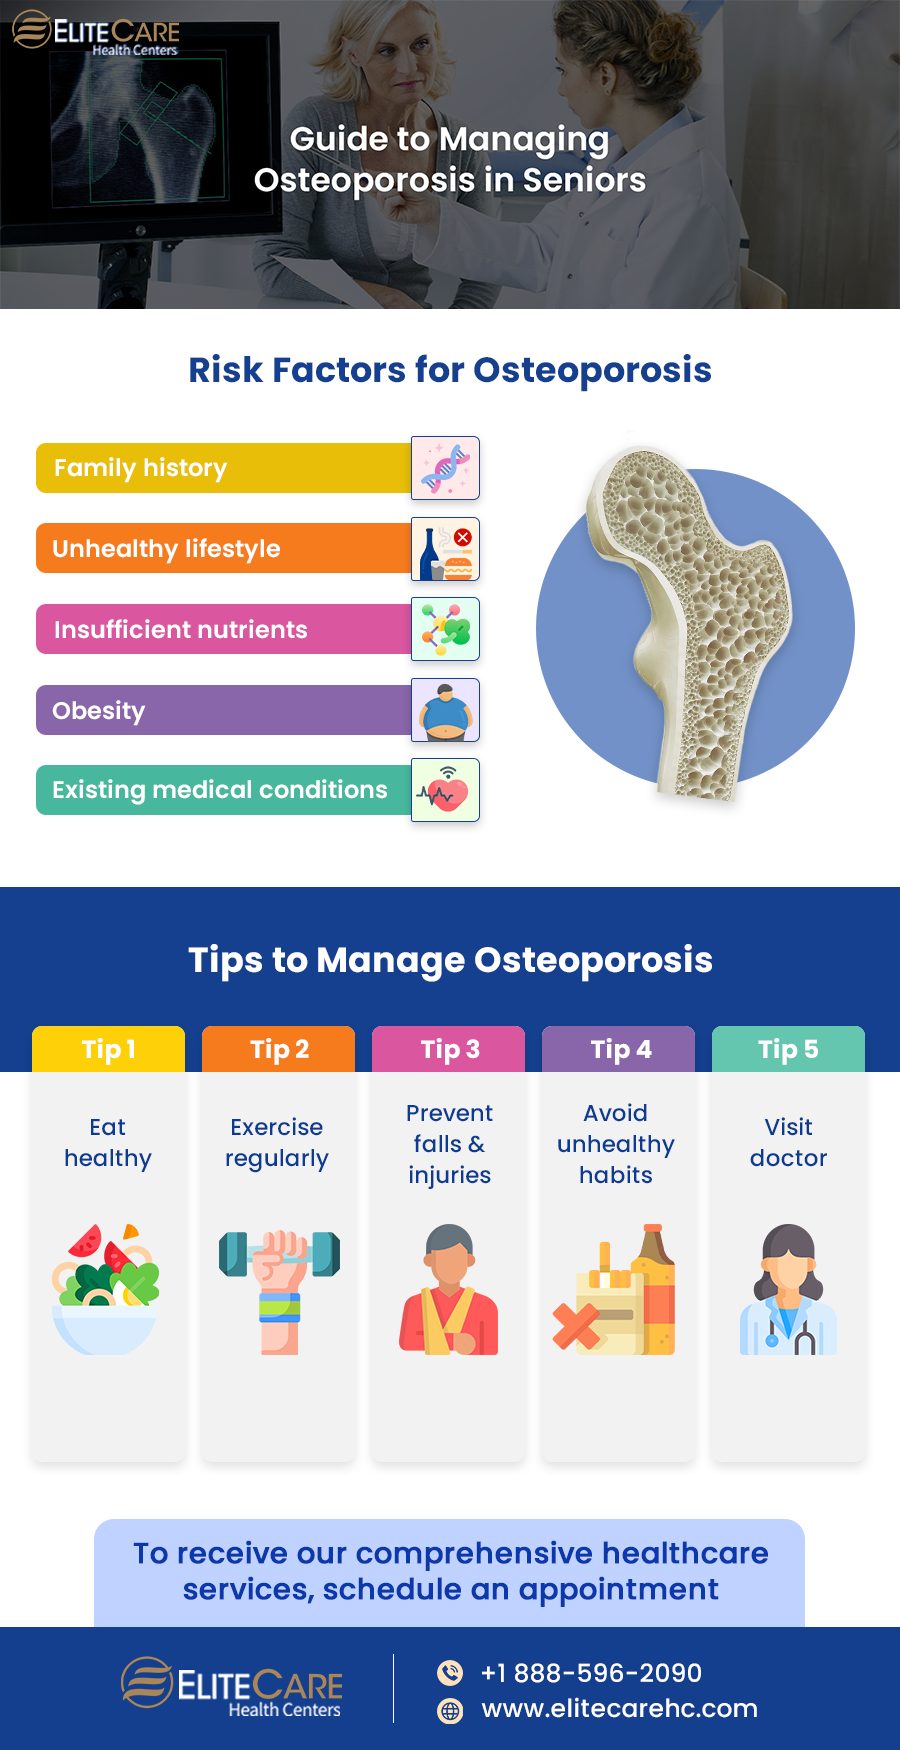 Guide to Managing Osteoporosis in Seniors | Infographic